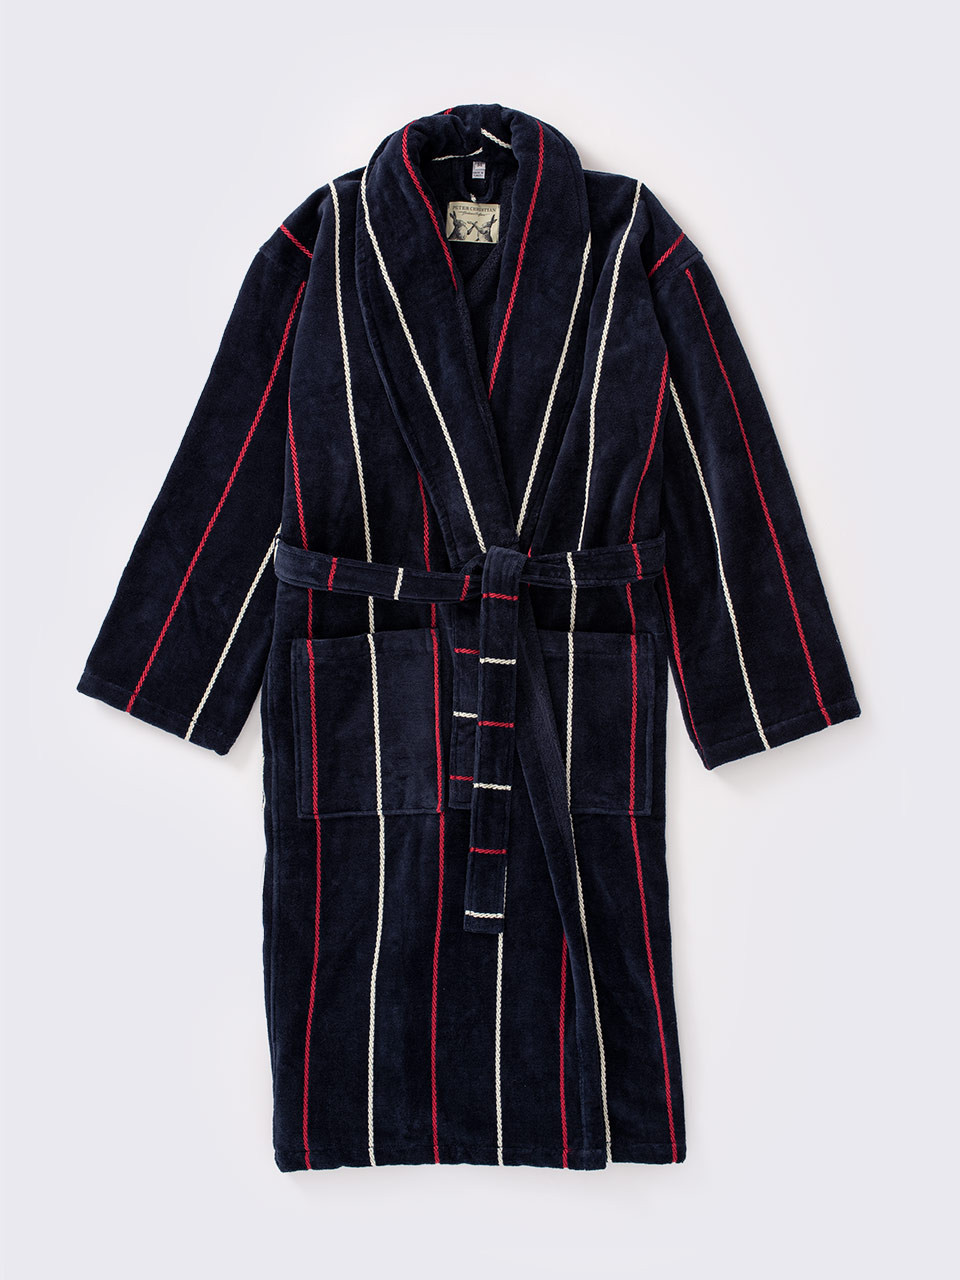 Mens Luxury Navy and Red Striped Velour Robe 41524.1658409126